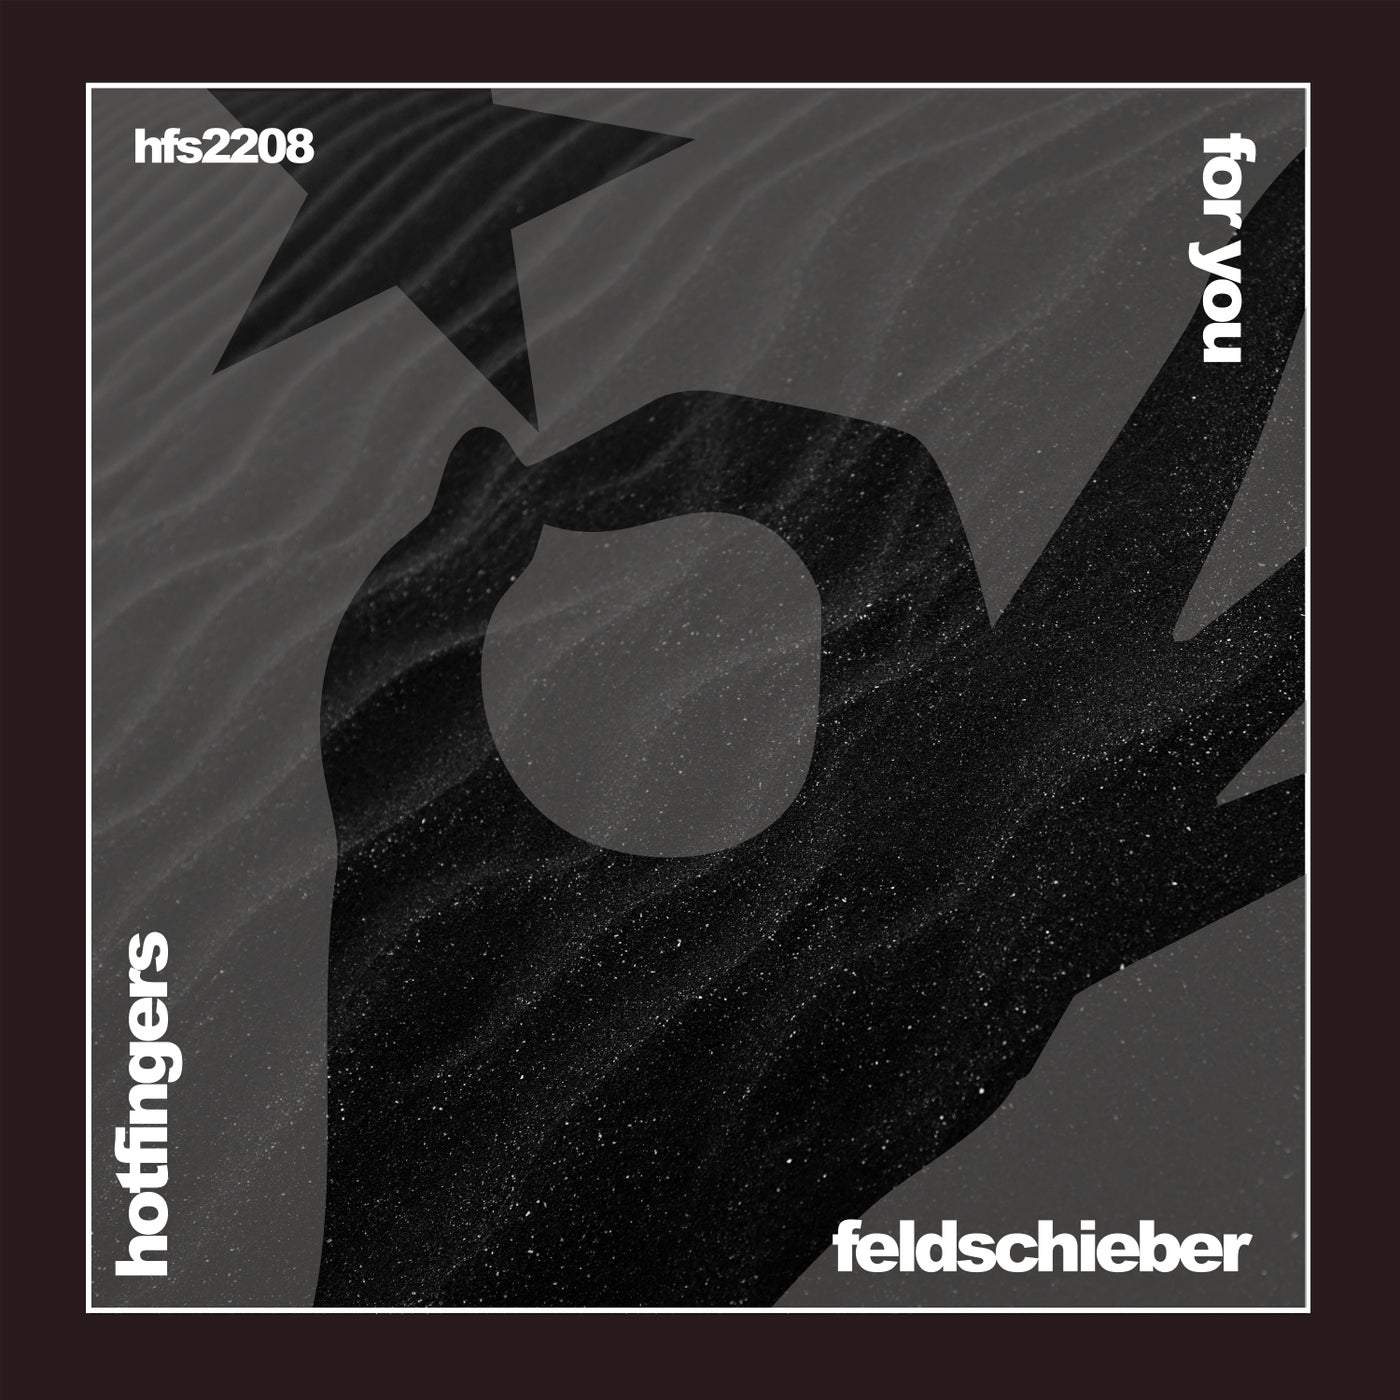 image cover: Feldschieber - For You [HFS2208] / Hotfingers